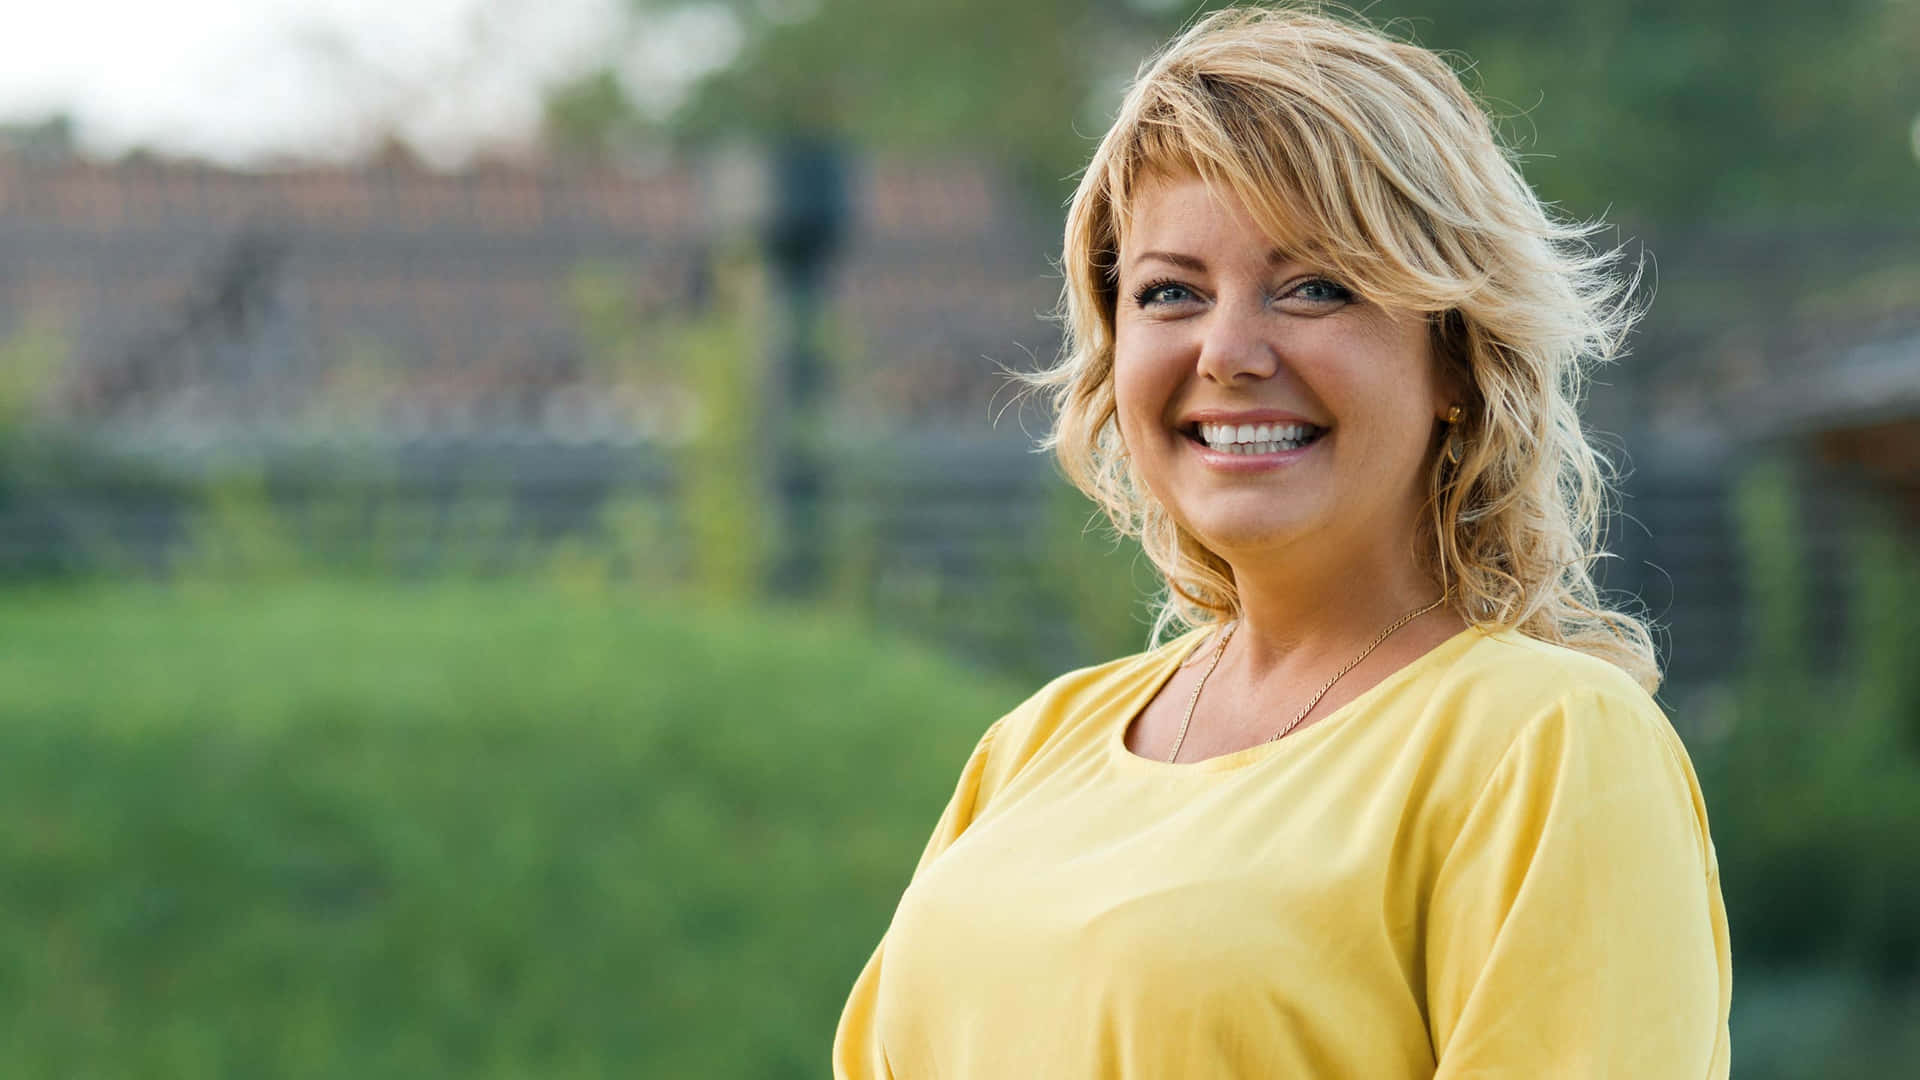 A Woman In A Yellow Shirt Smiling